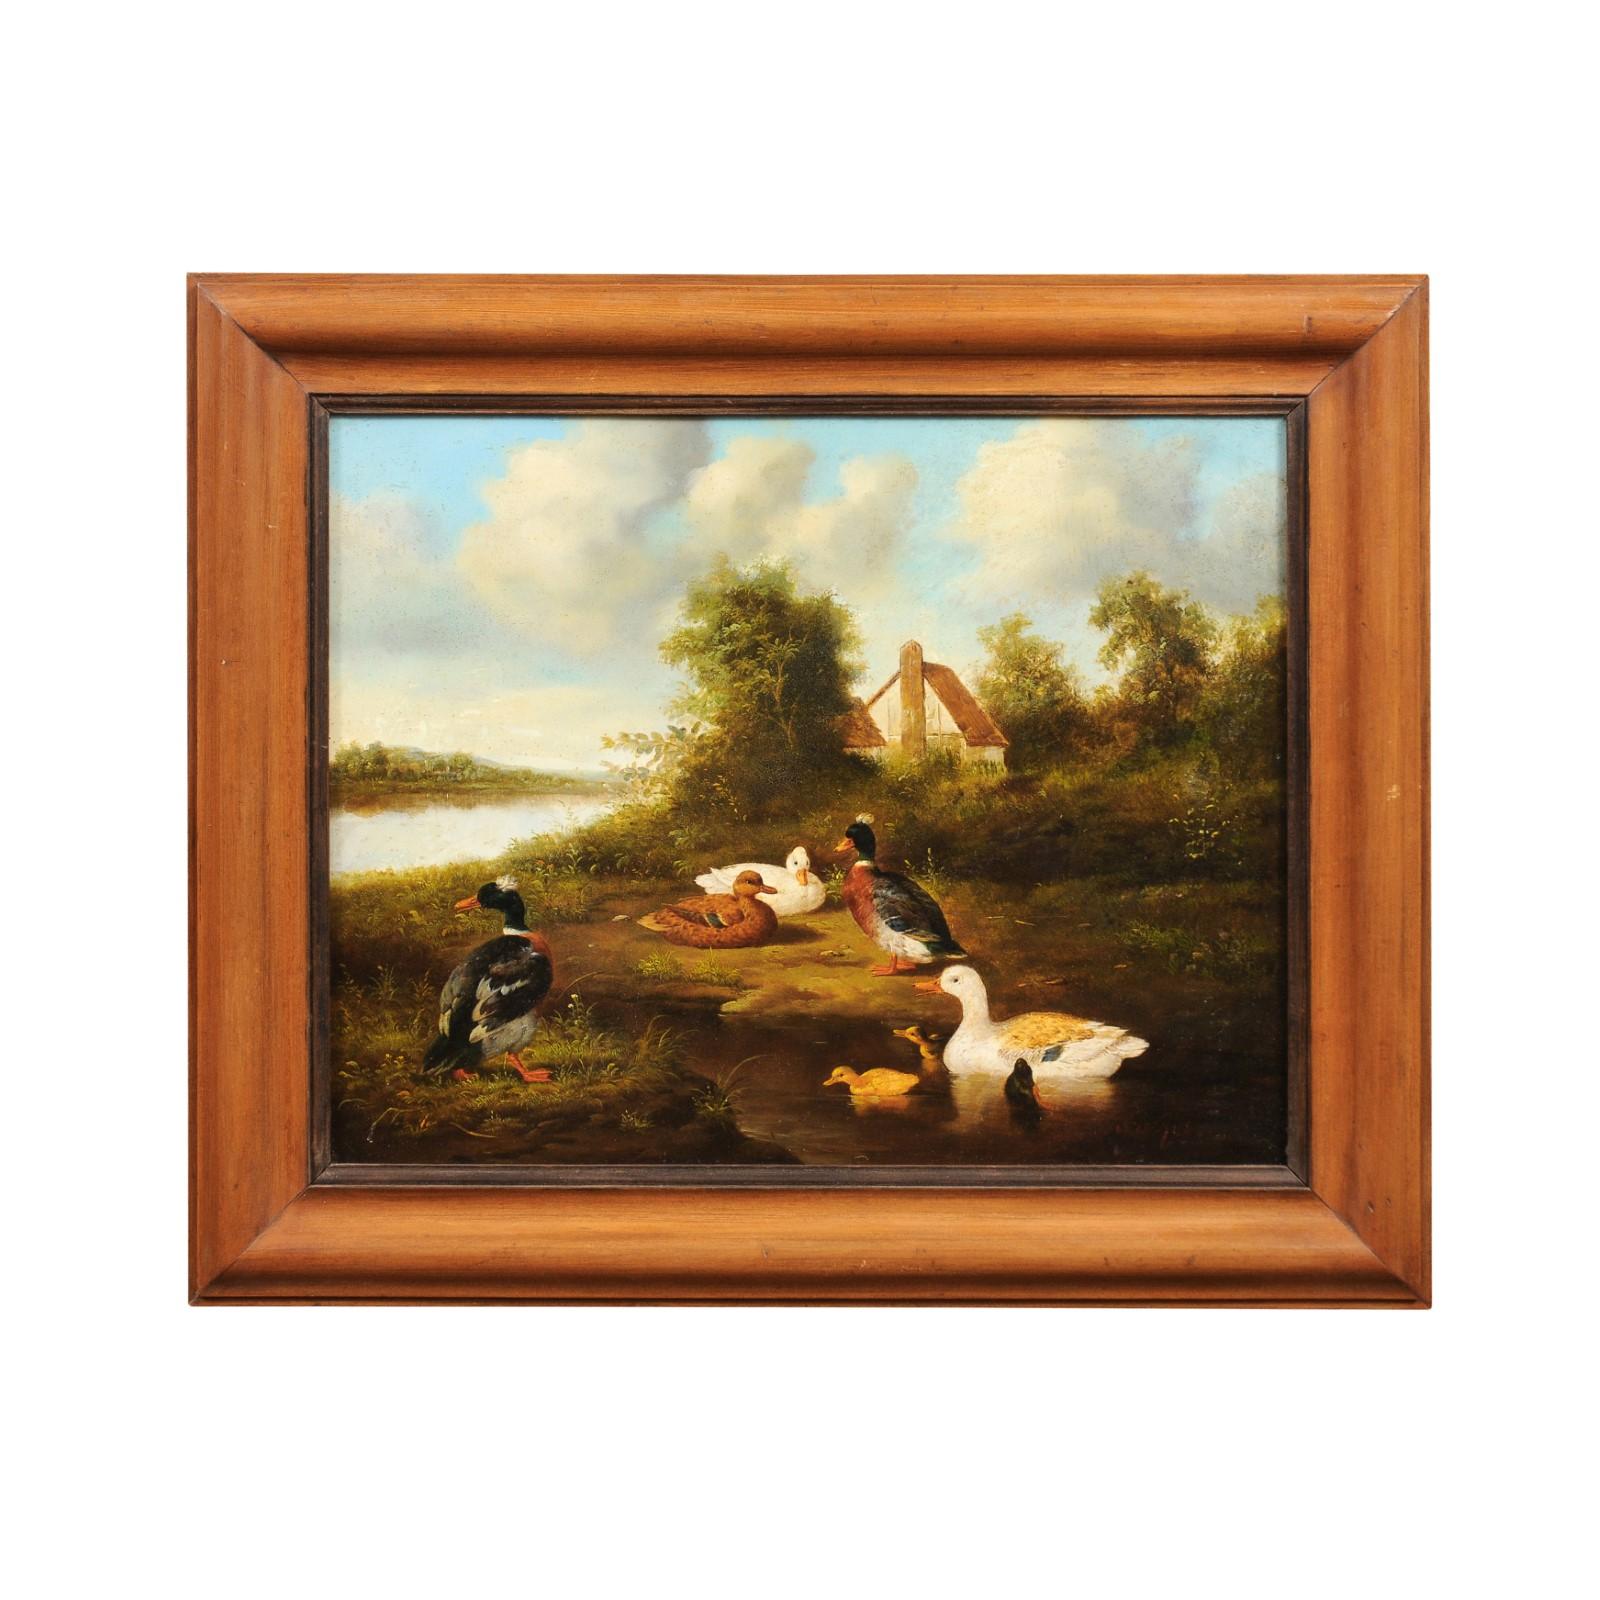 A French oil on panel barnyard painting from the Mid-19th Century, depicting ducks in a landscape. Created in France during the 1850s, this oil on panel painting depicts a peaceful scene. Showcasing vibrant, contrasting colors, the painting features